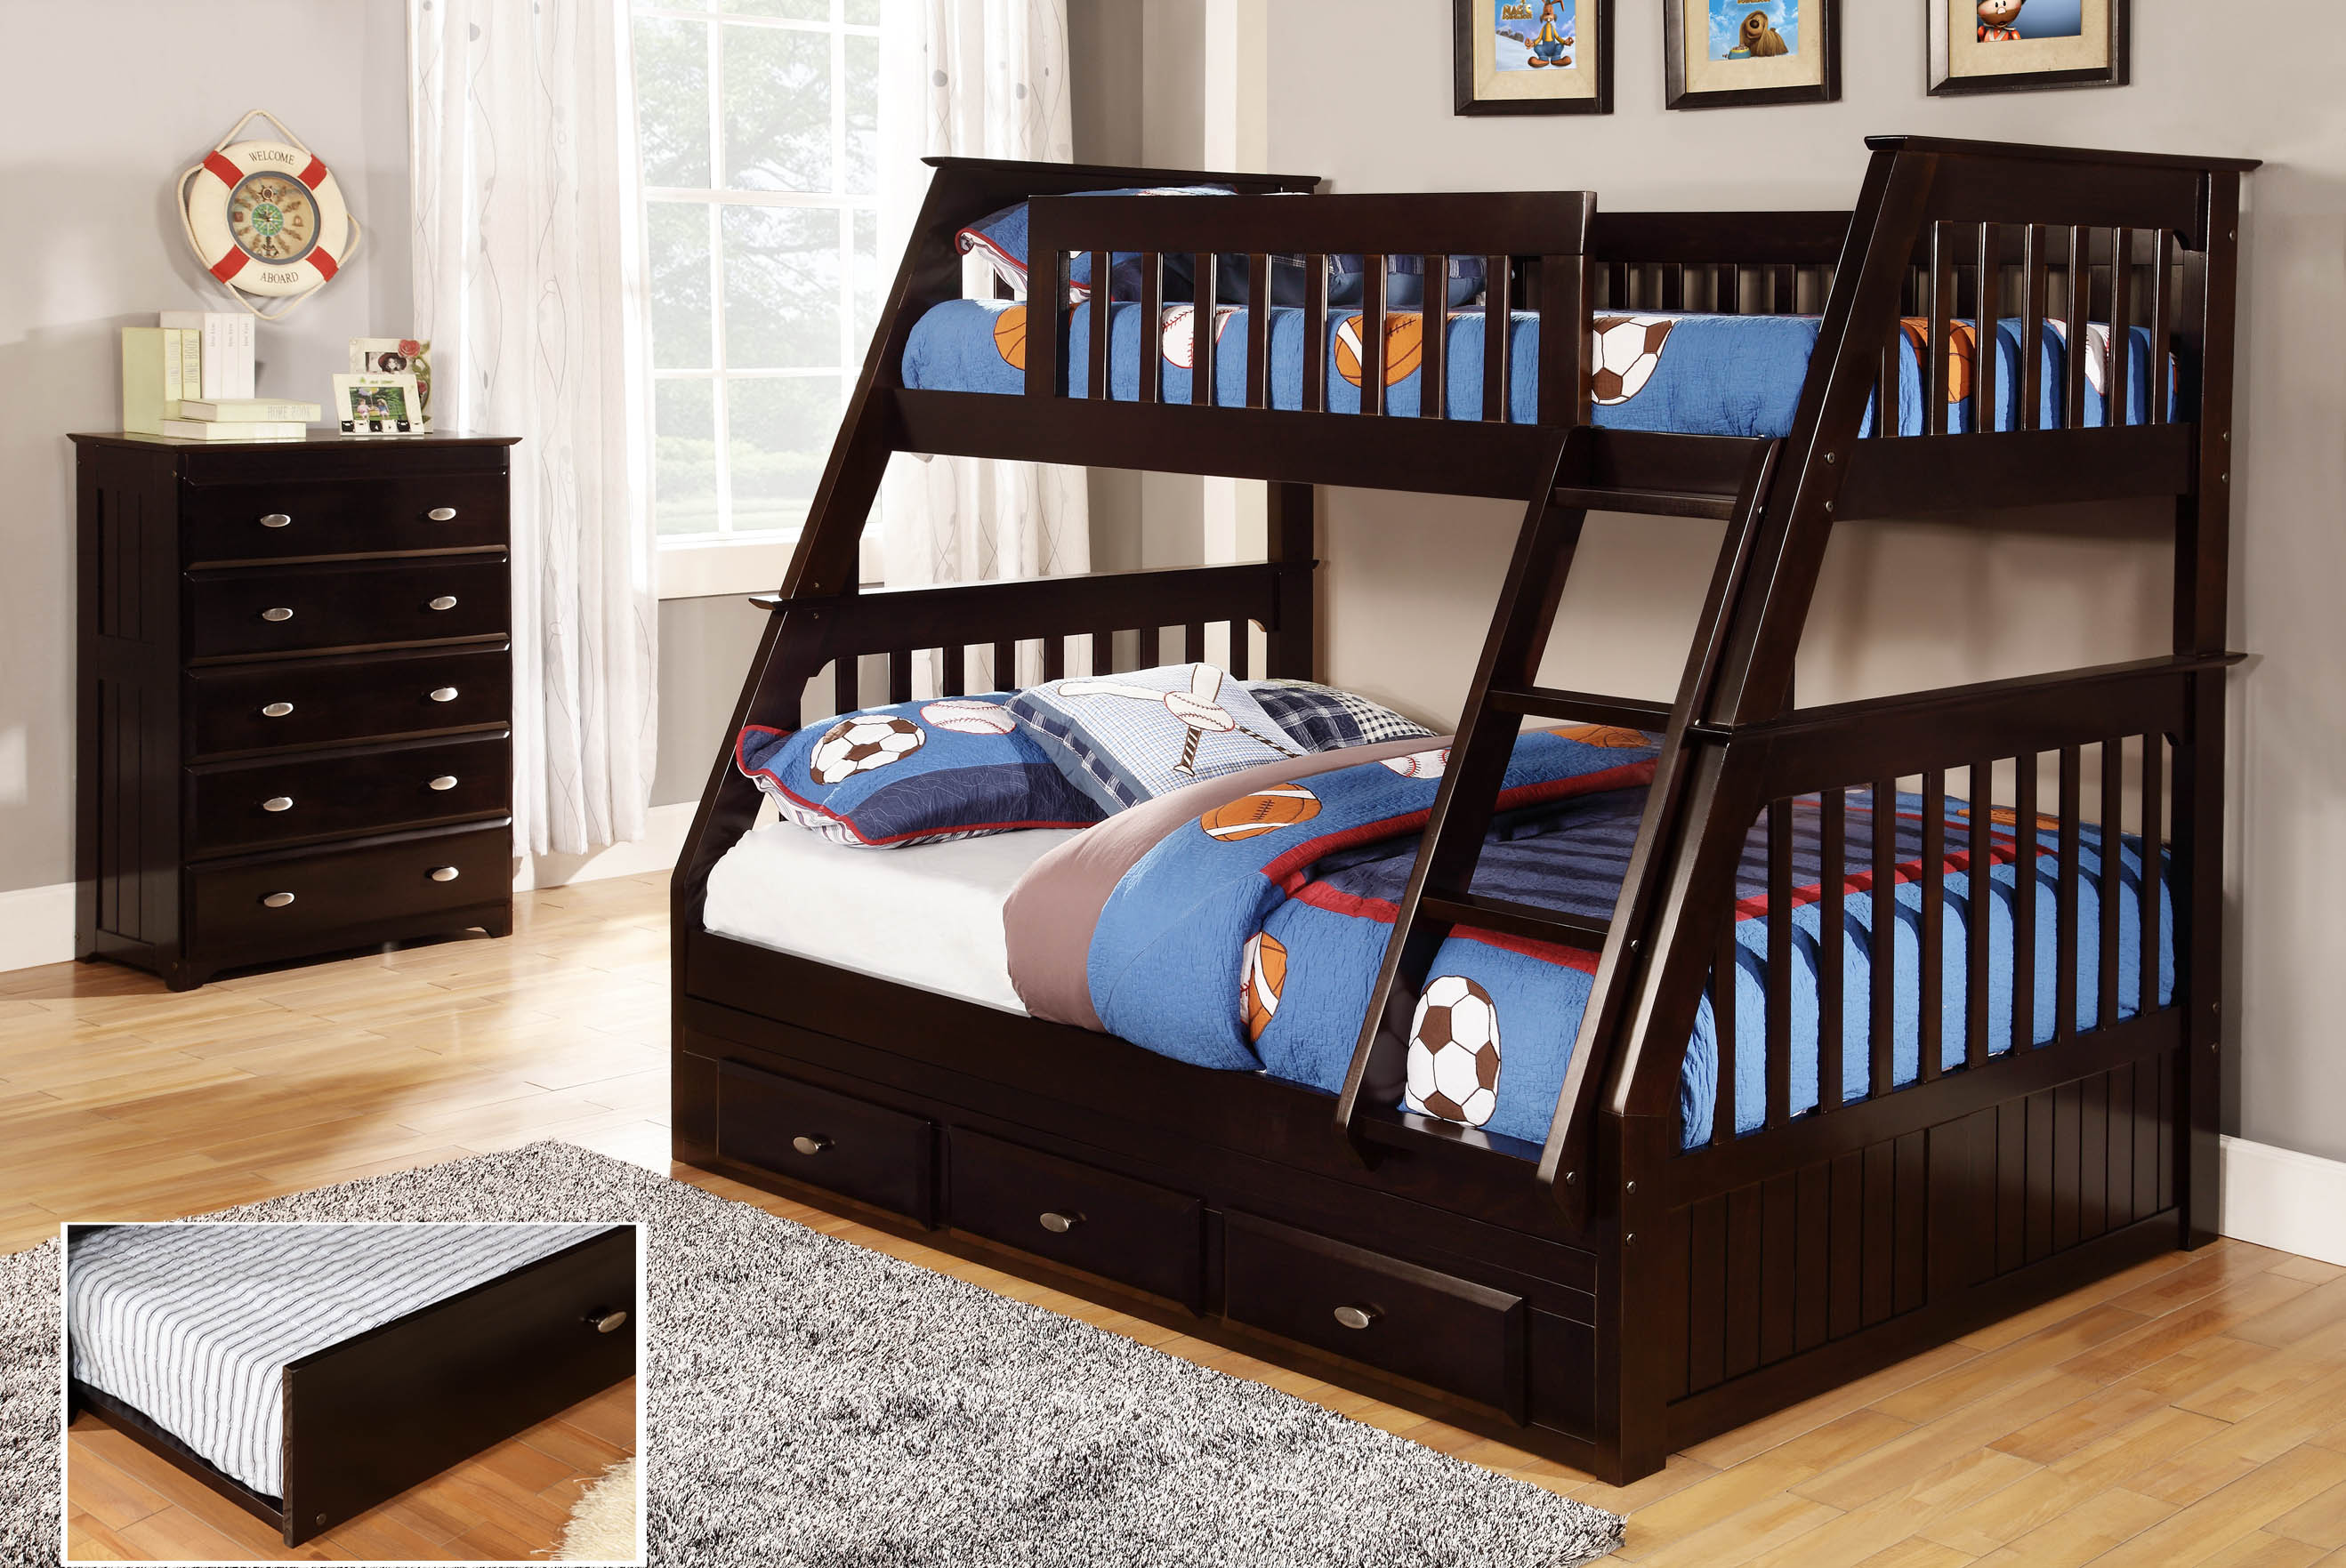 Espresso Mission Bunk Bed Kfs S, Maddox Bunk Bed Twin Over Full